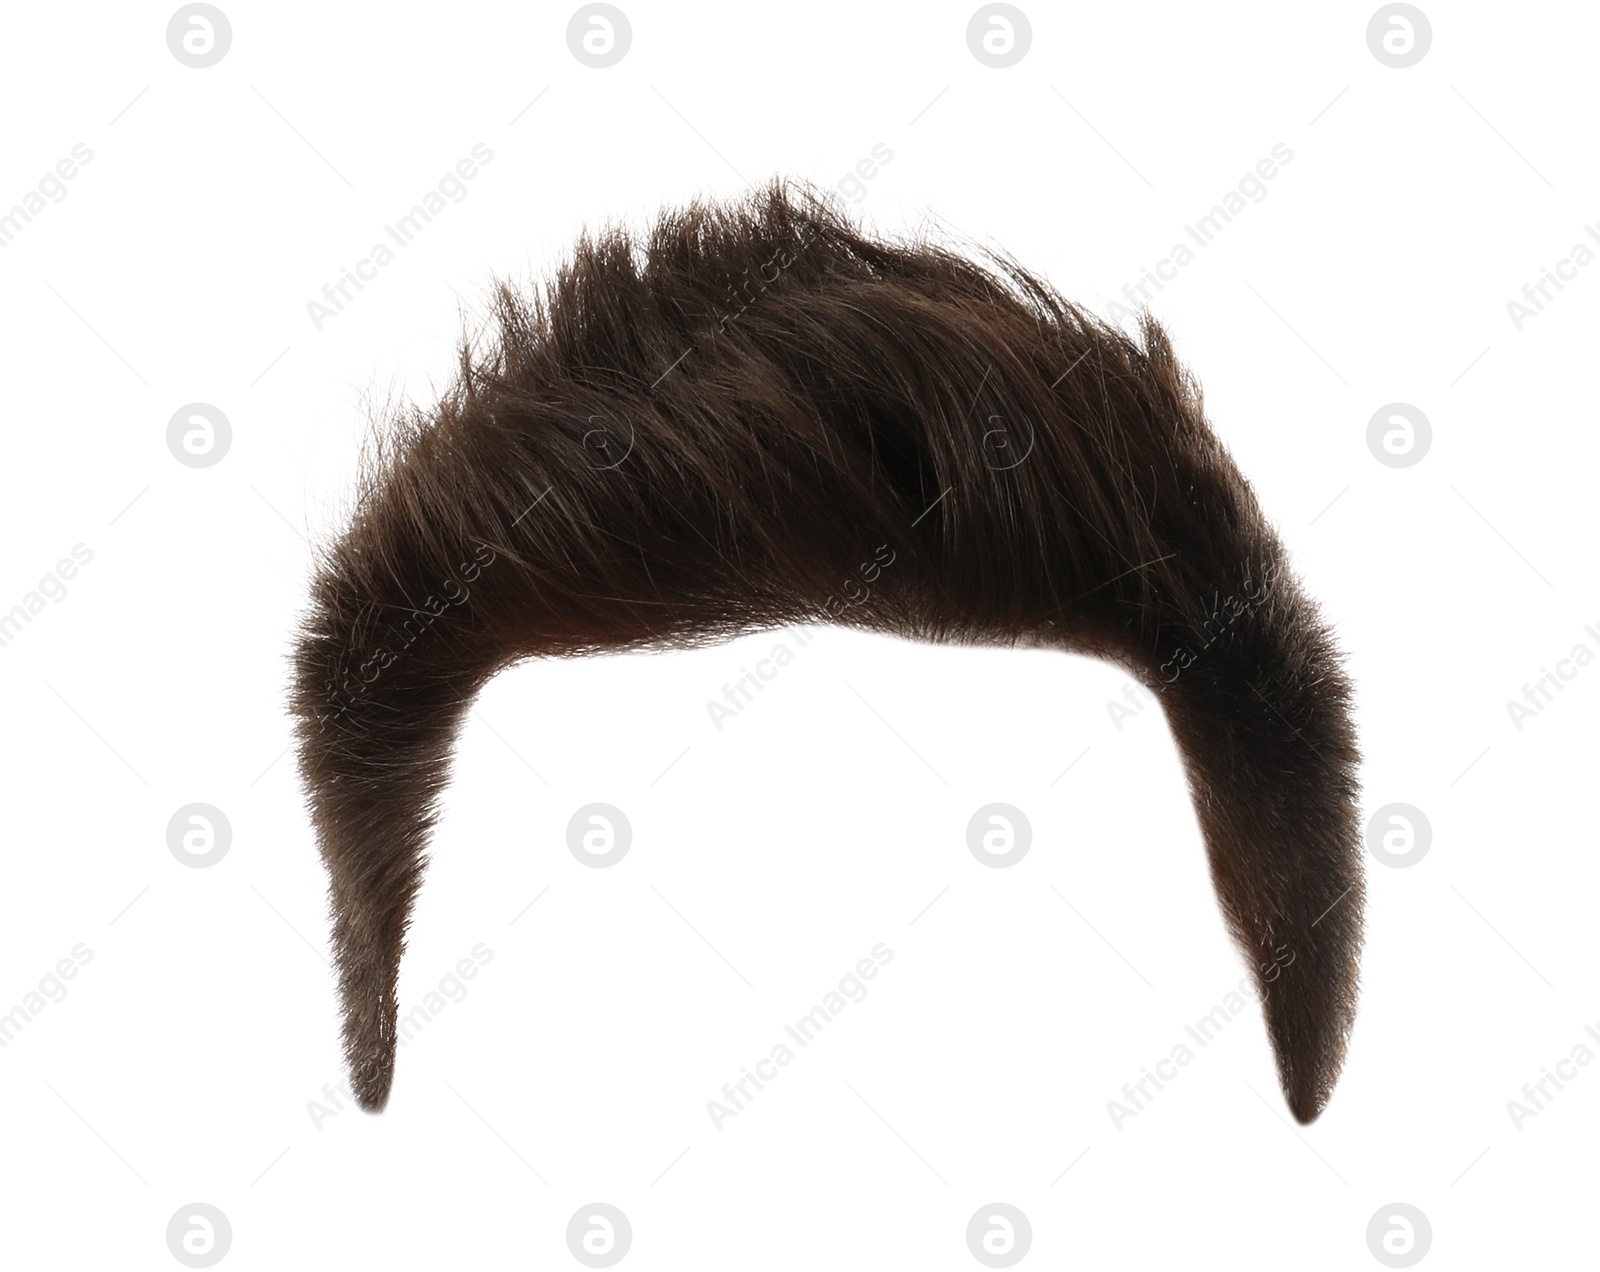 Image of Fashionable men's hairstyle for designers on white background